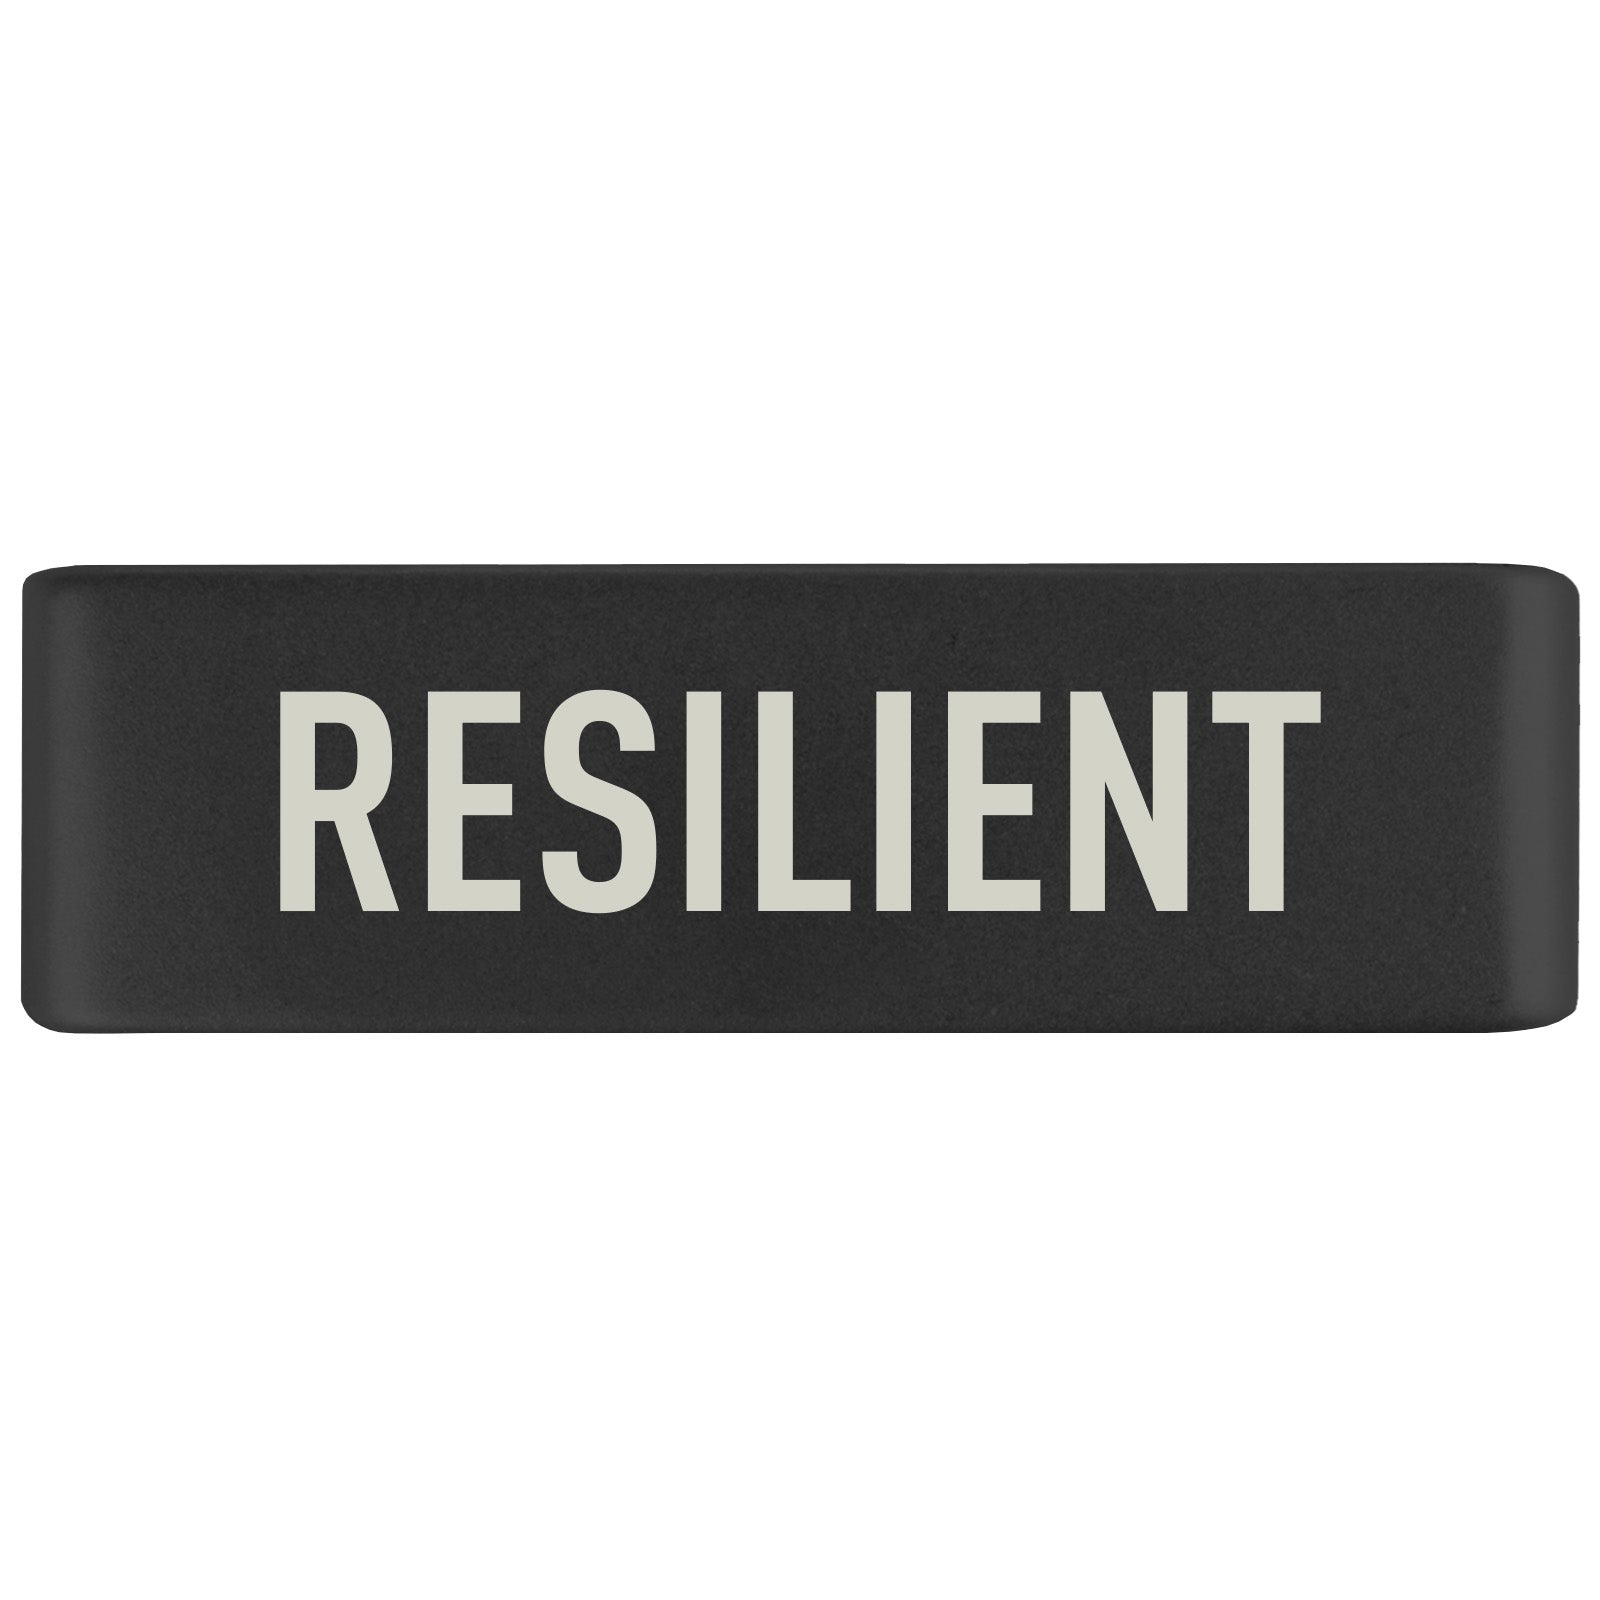 Resilient Badge Badge 19mm - ROAD iD